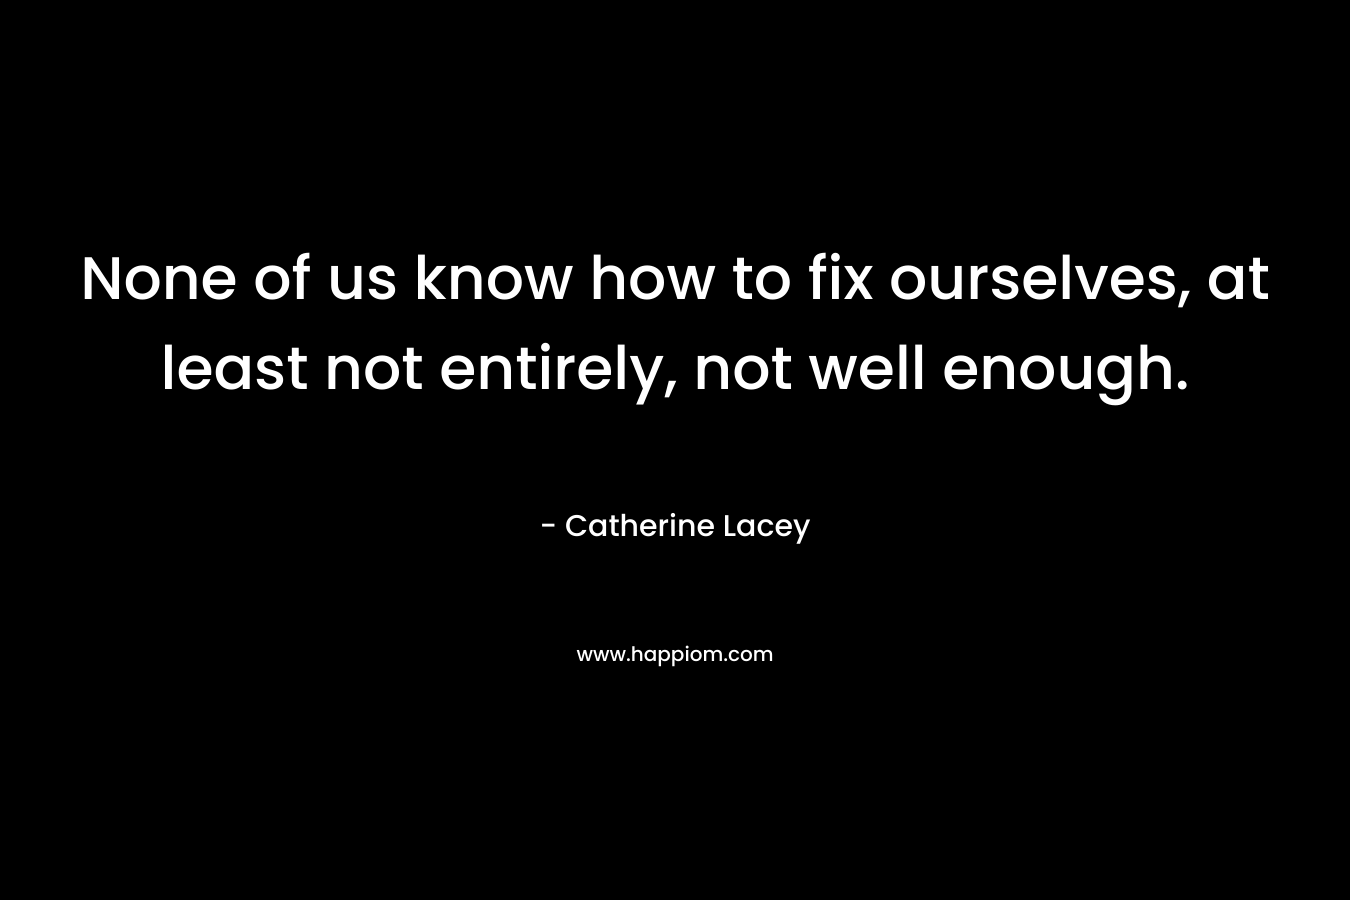 None of us know how to fix ourselves, at least not entirely, not well enough. – Catherine Lacey